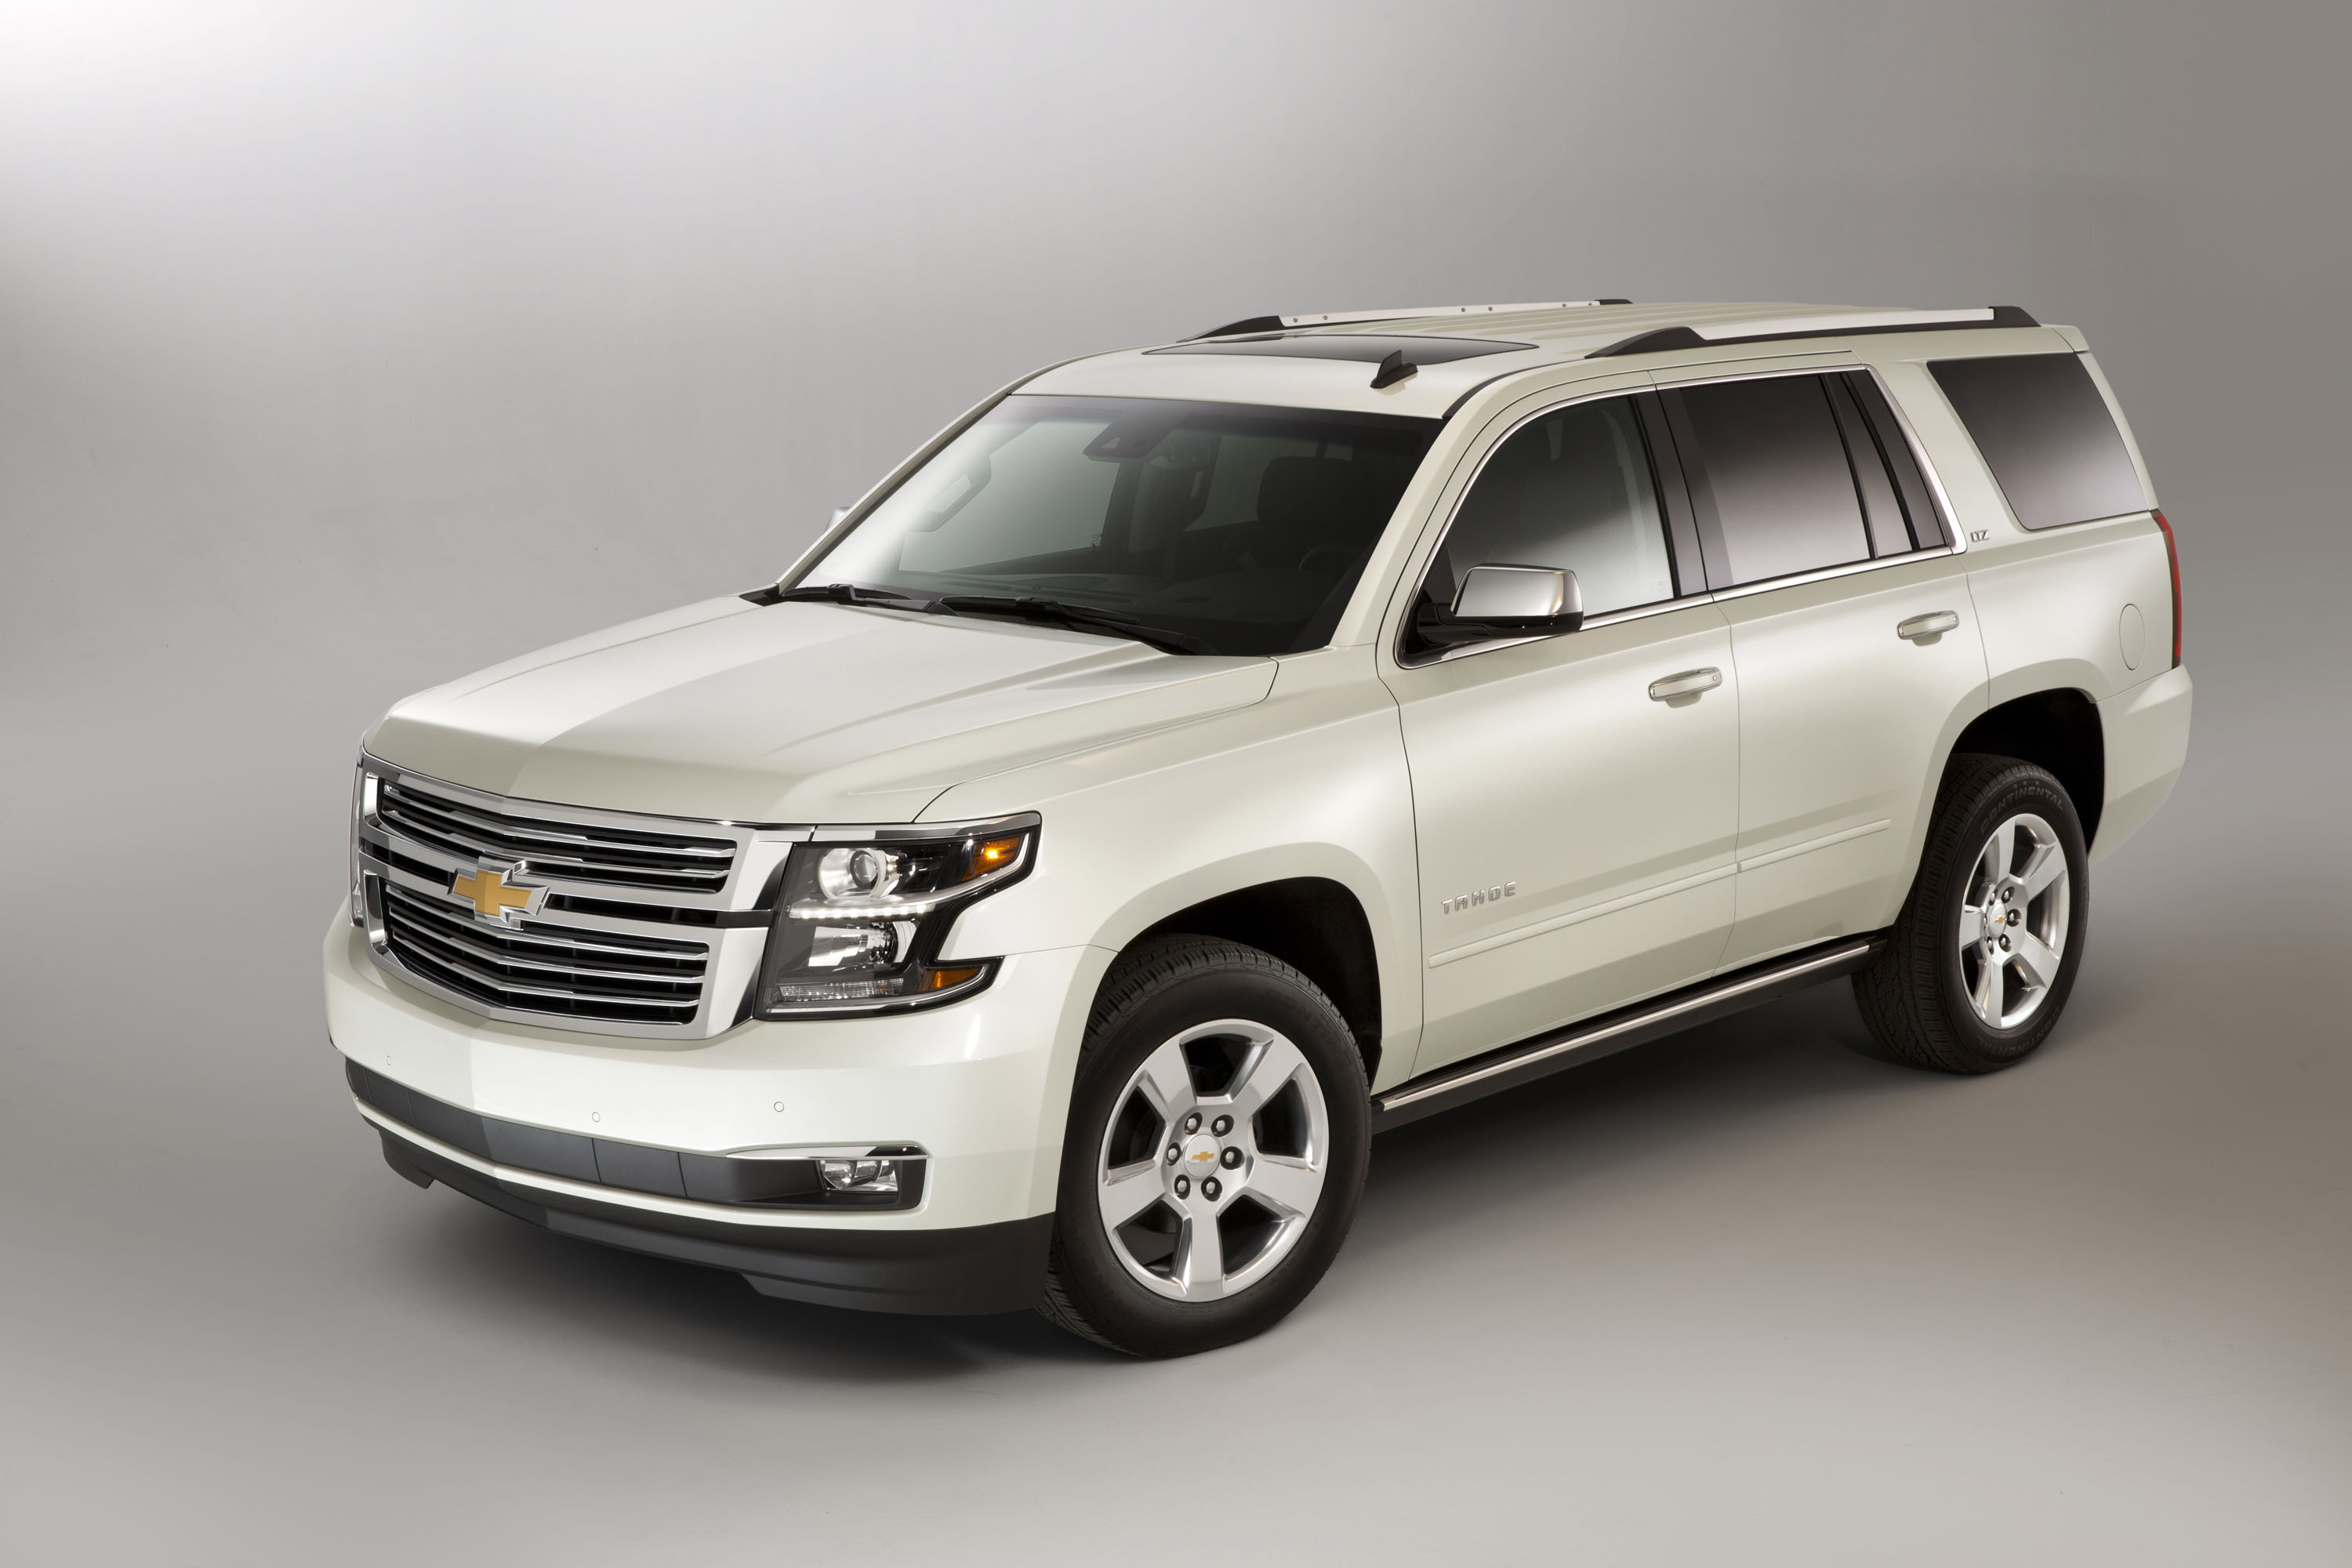 2019 Chevrolet Tahoe (Chevy) Review, Ratings, Specs, Prices, and Photos